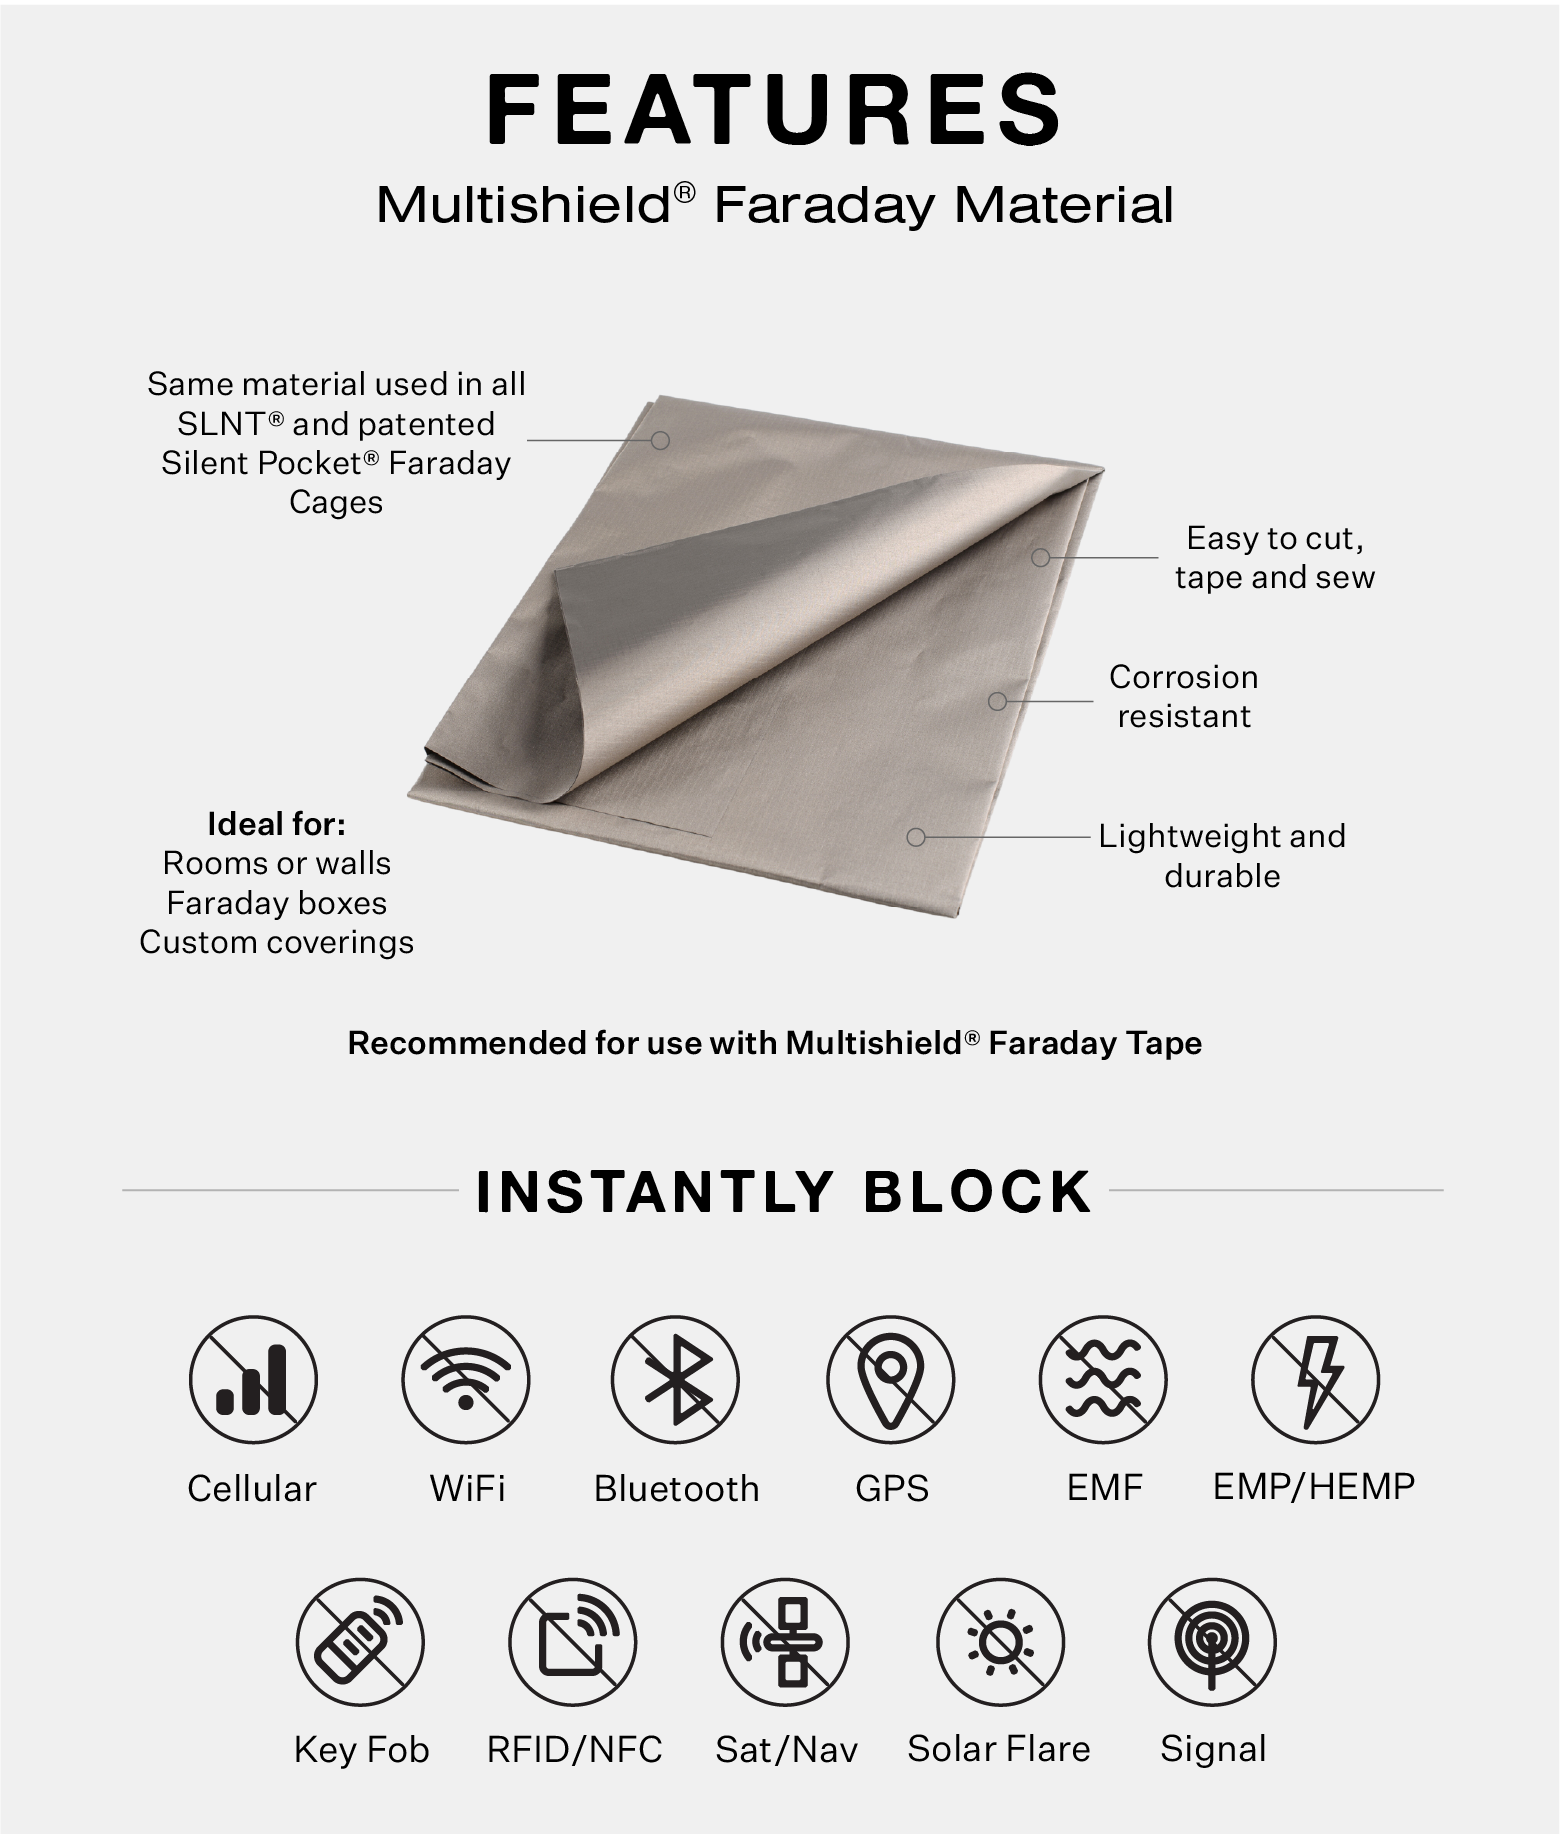 JJ Care Faraday Fabric [Pack of 2, 44 inch x 39 inch Faraday Cloth + 1 inch x 24 inch Long Faraday Tape + Instructions] - Military Grade Shielding